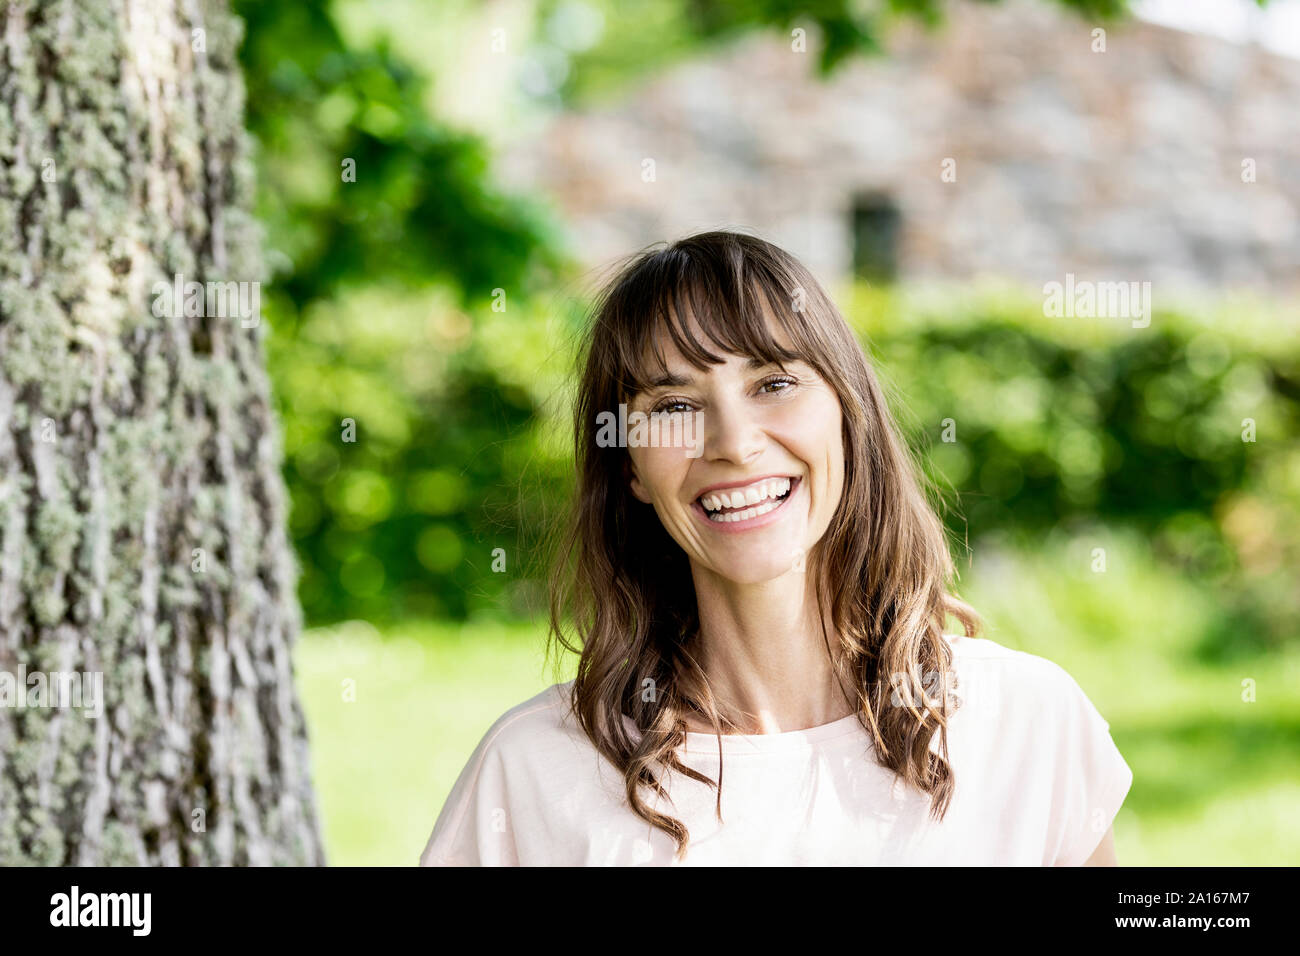 Portrait of happy brunette woman at a tree trunk Stock Photo